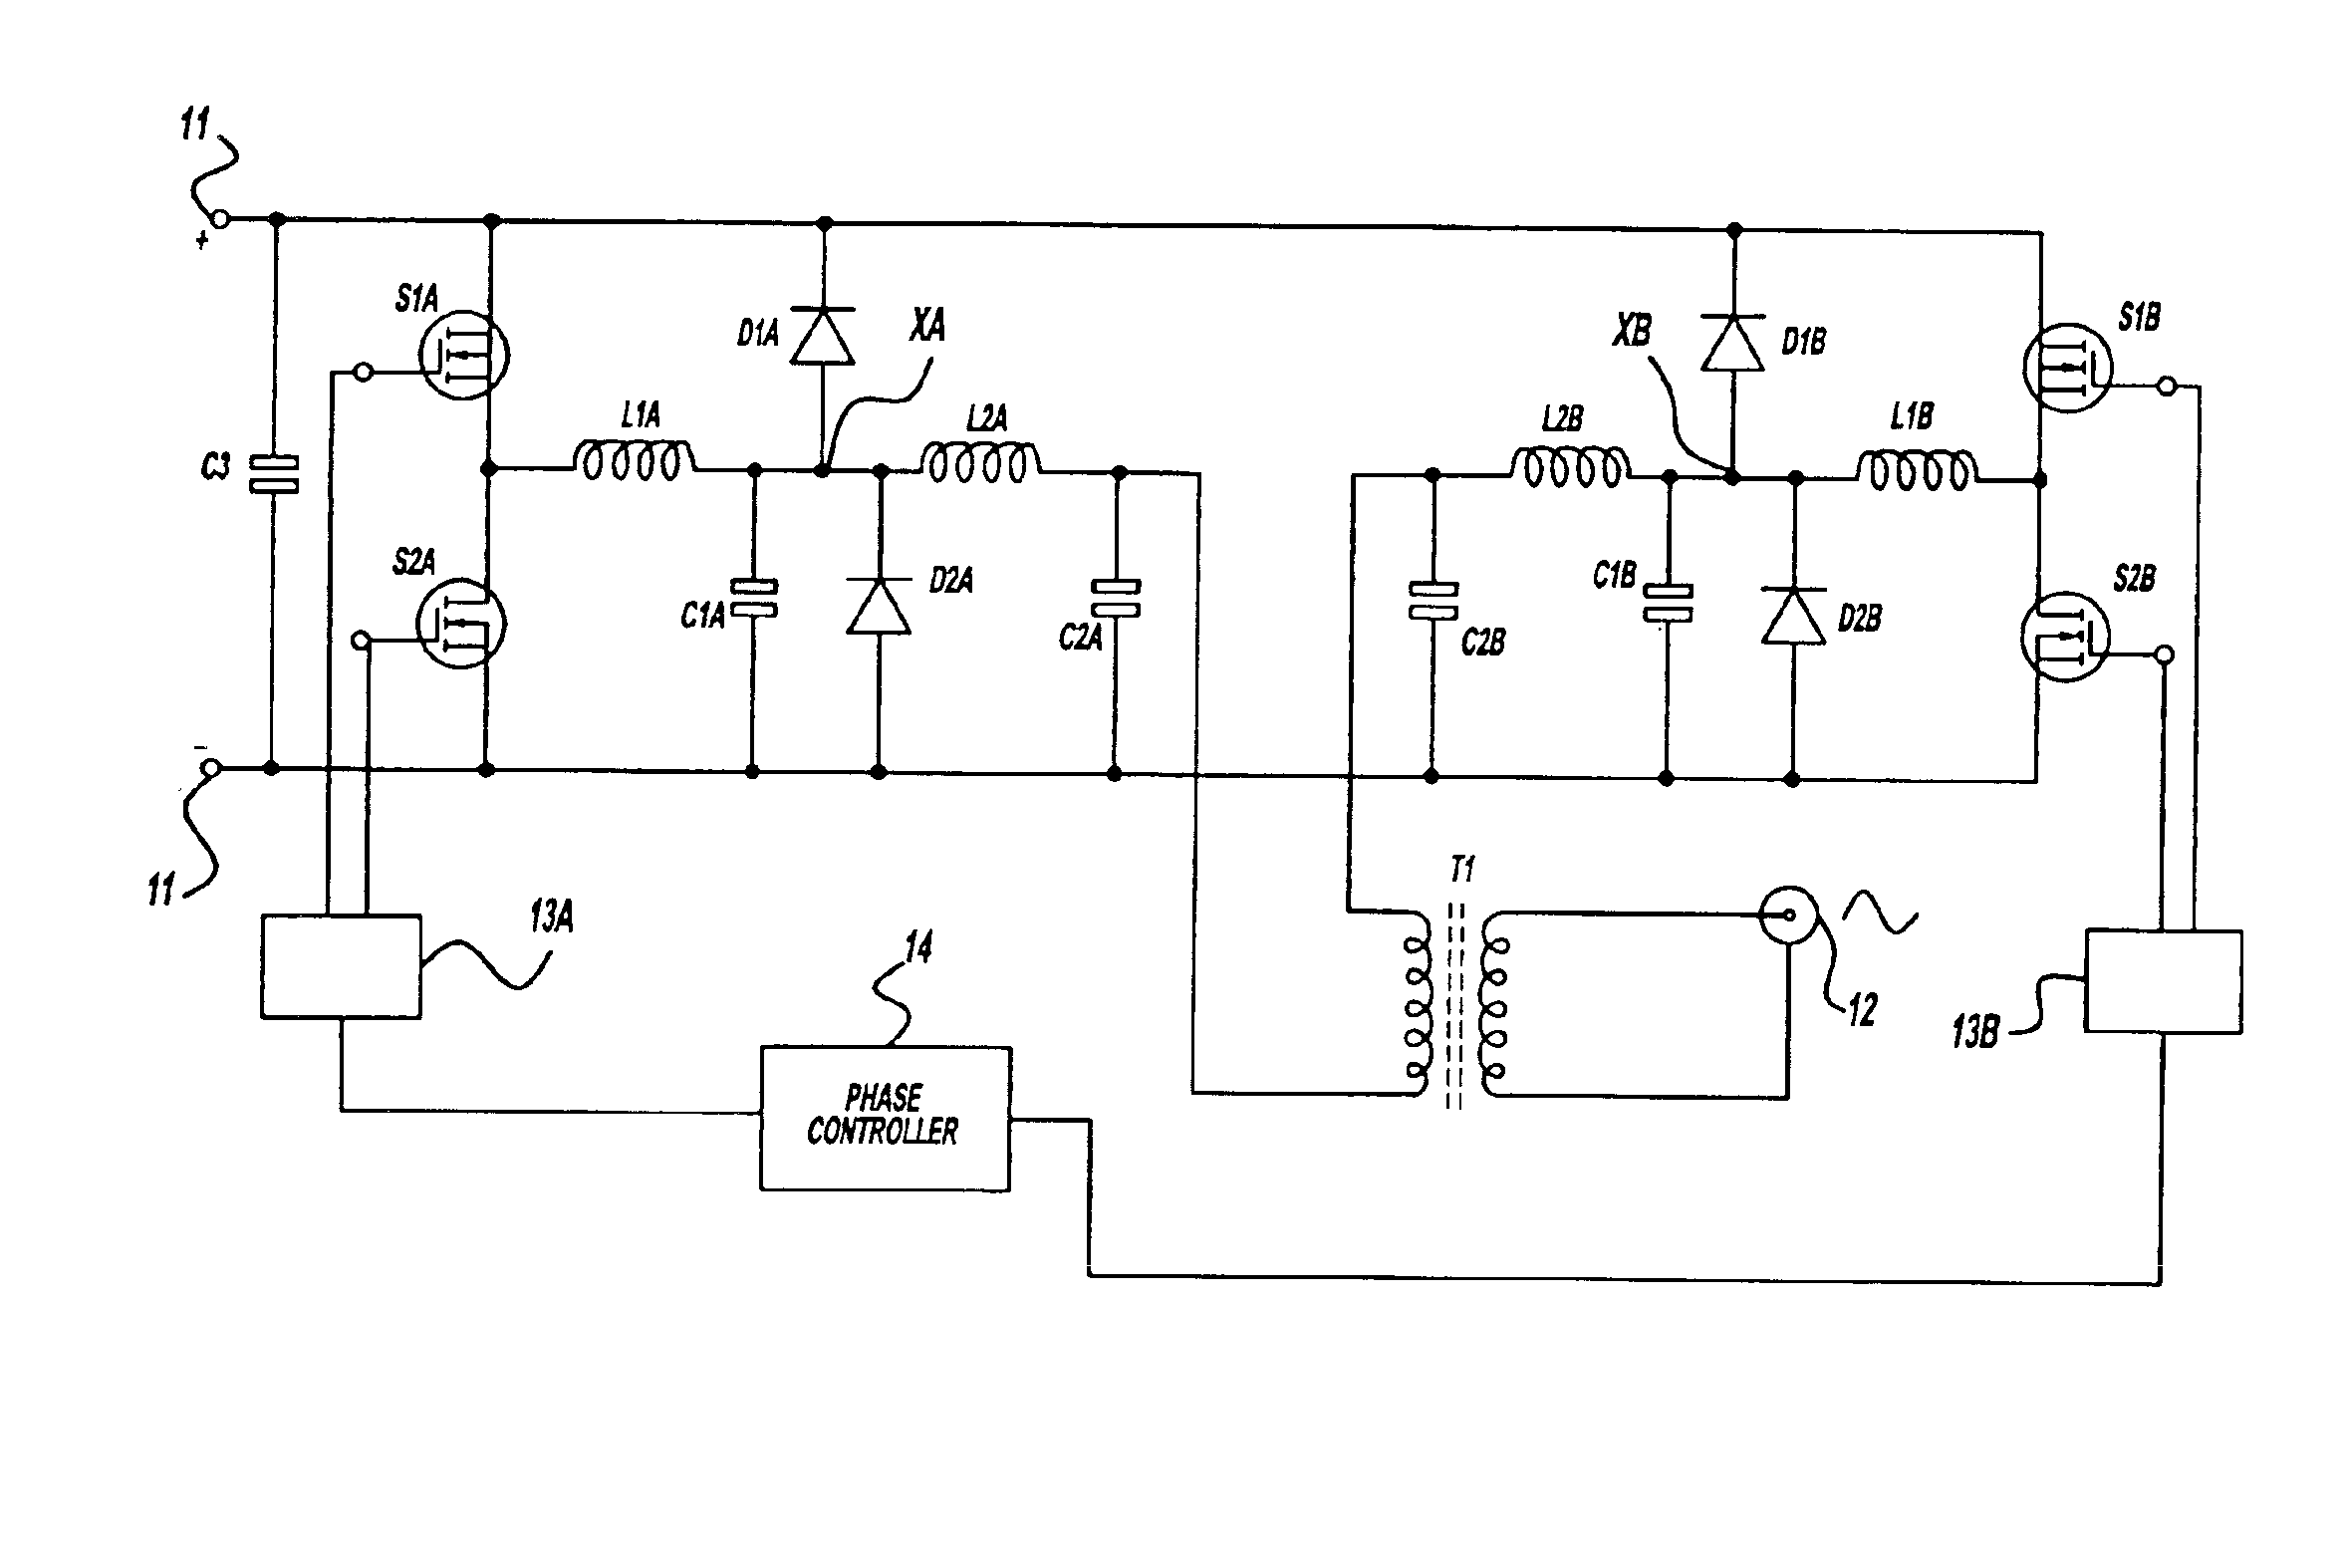 Class E amplifier with inductive clamp